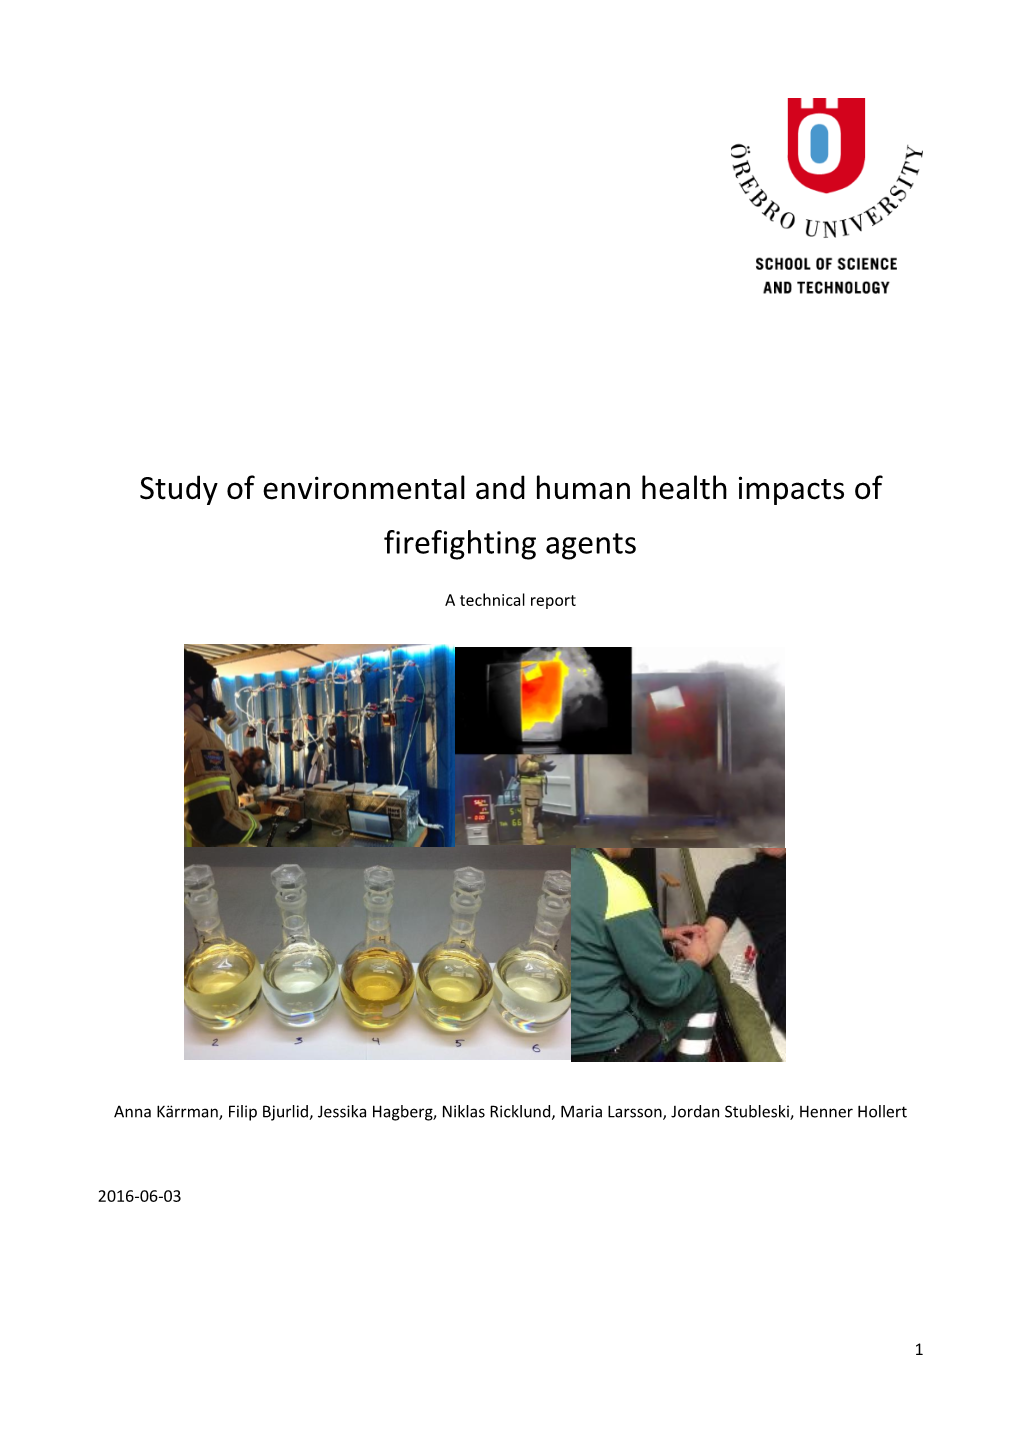 Study of Environmental and Human Health Impacts of Firefighting Agents